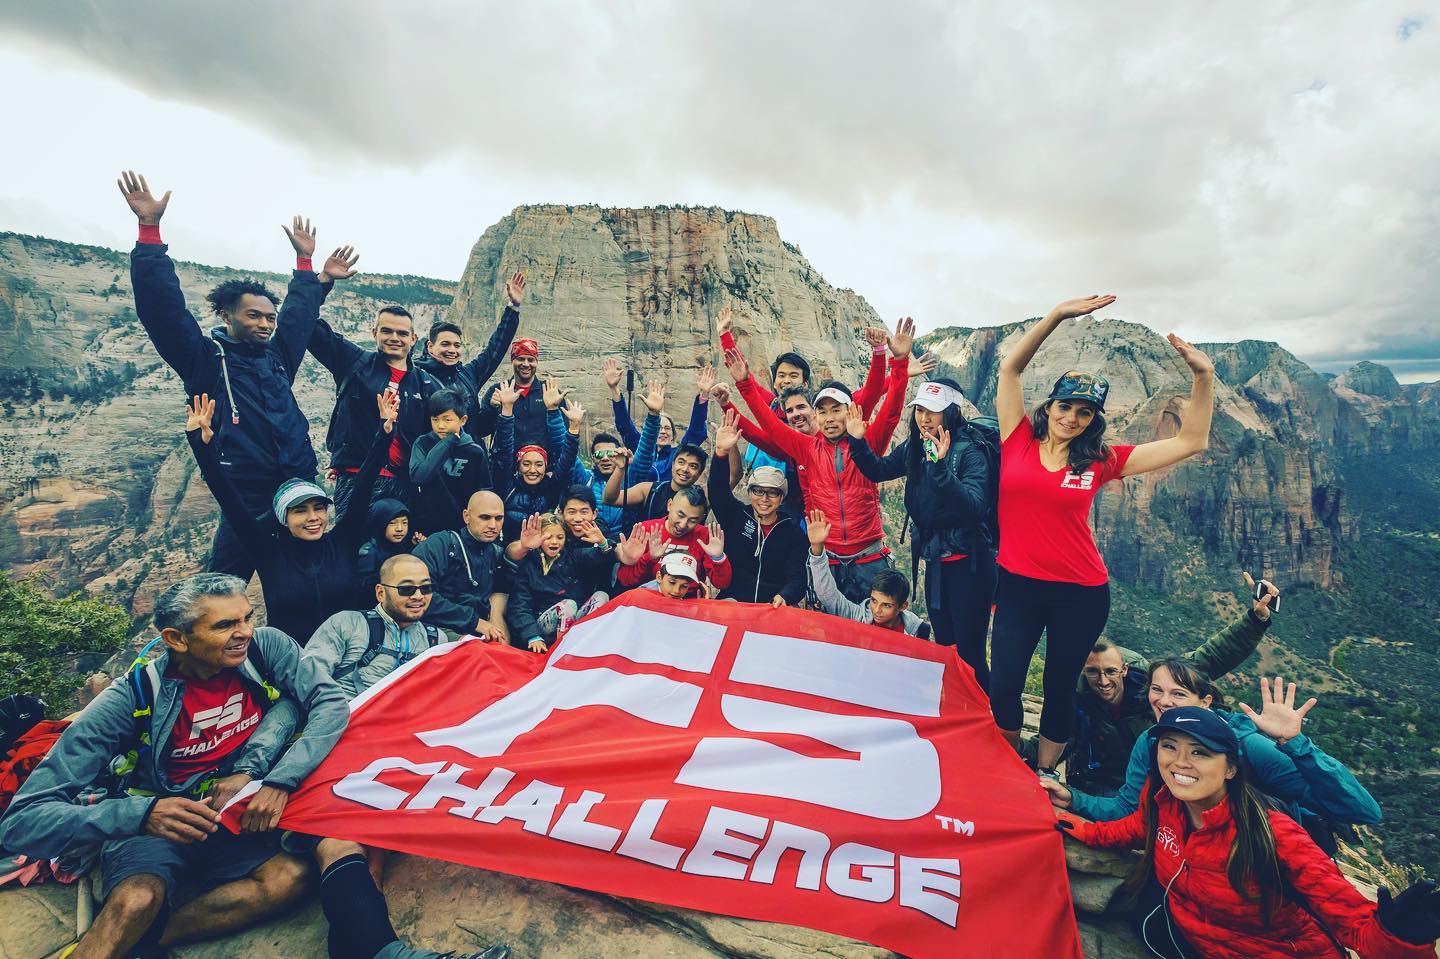 Members of the F5 Challenge group after a hike to Angels Landing in Zion National Park.  Photo from the F5 Challenge Facebook page.